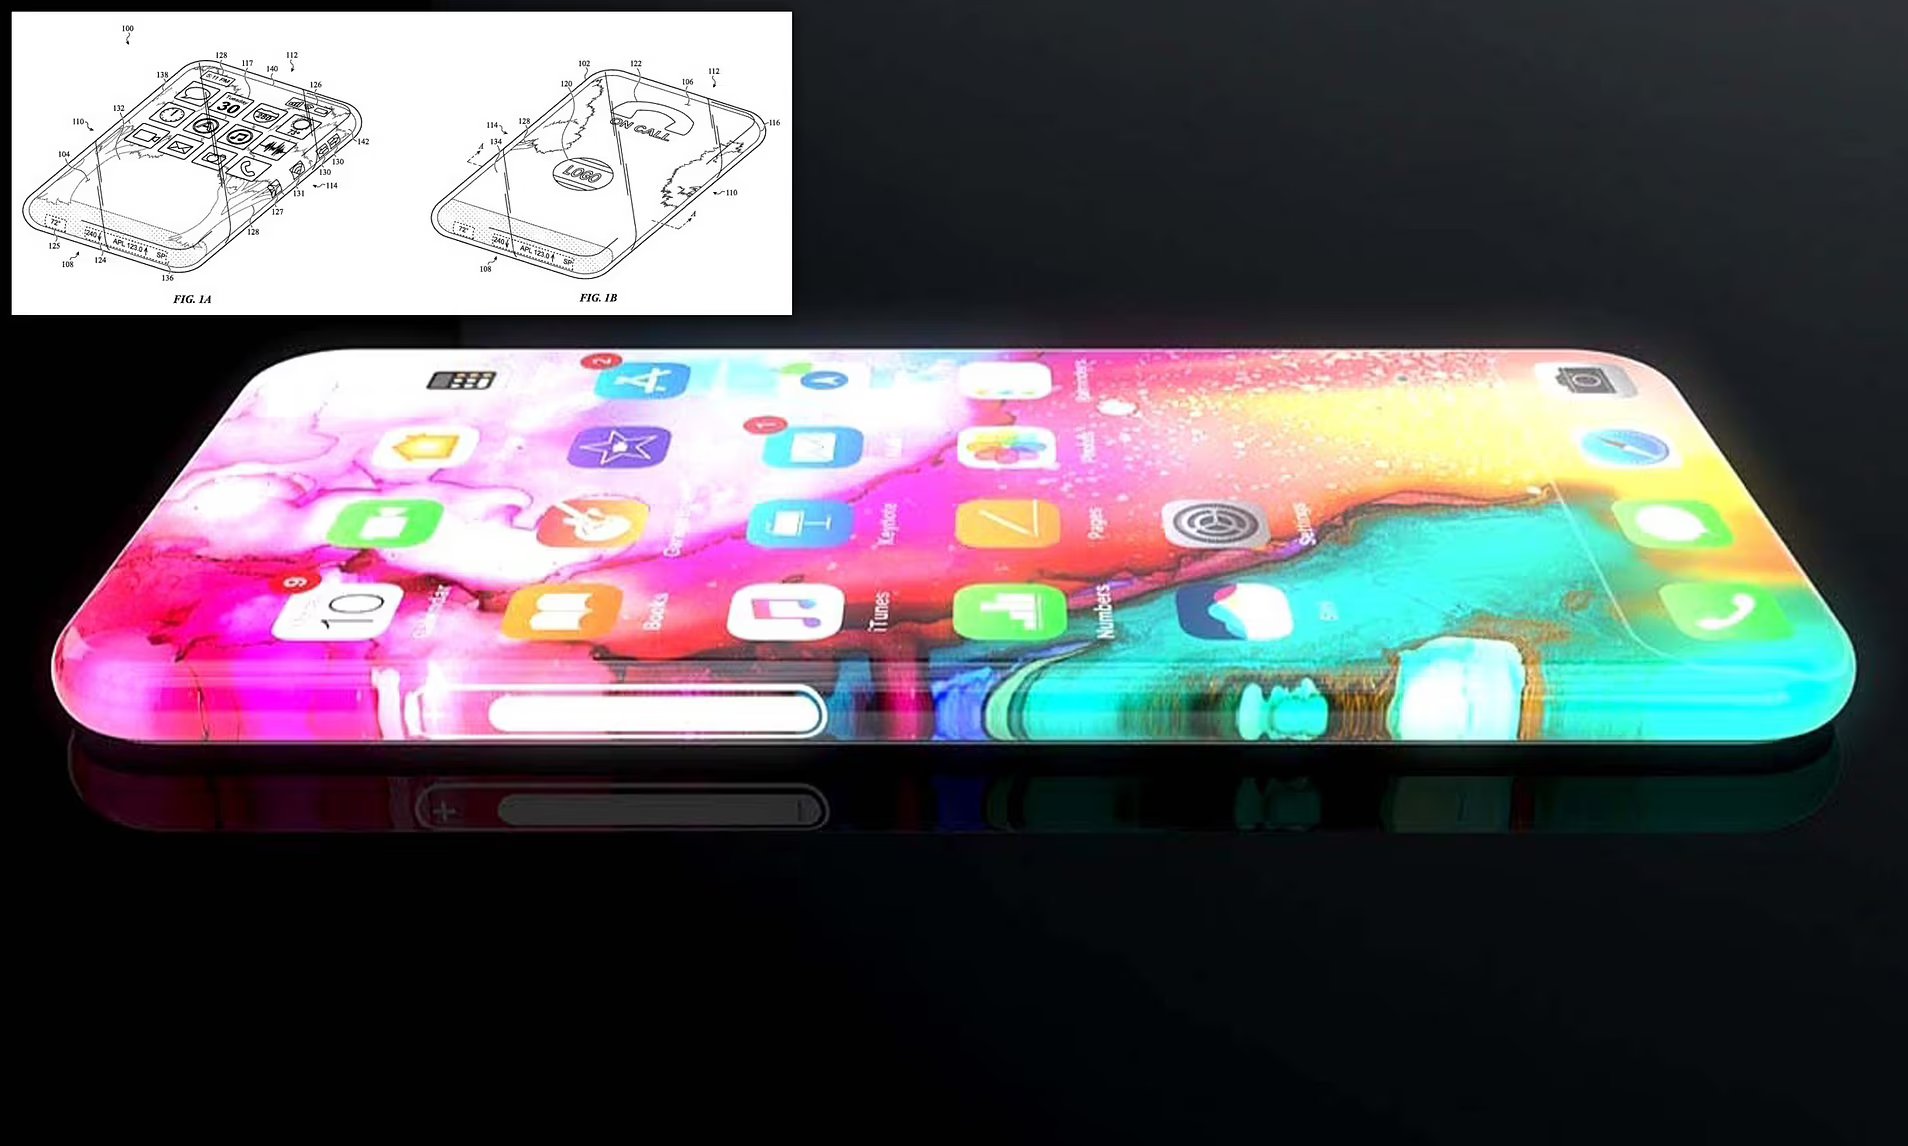 apple-is-working-on-an-iphone-with-an-all-glass-design-suggests-patent